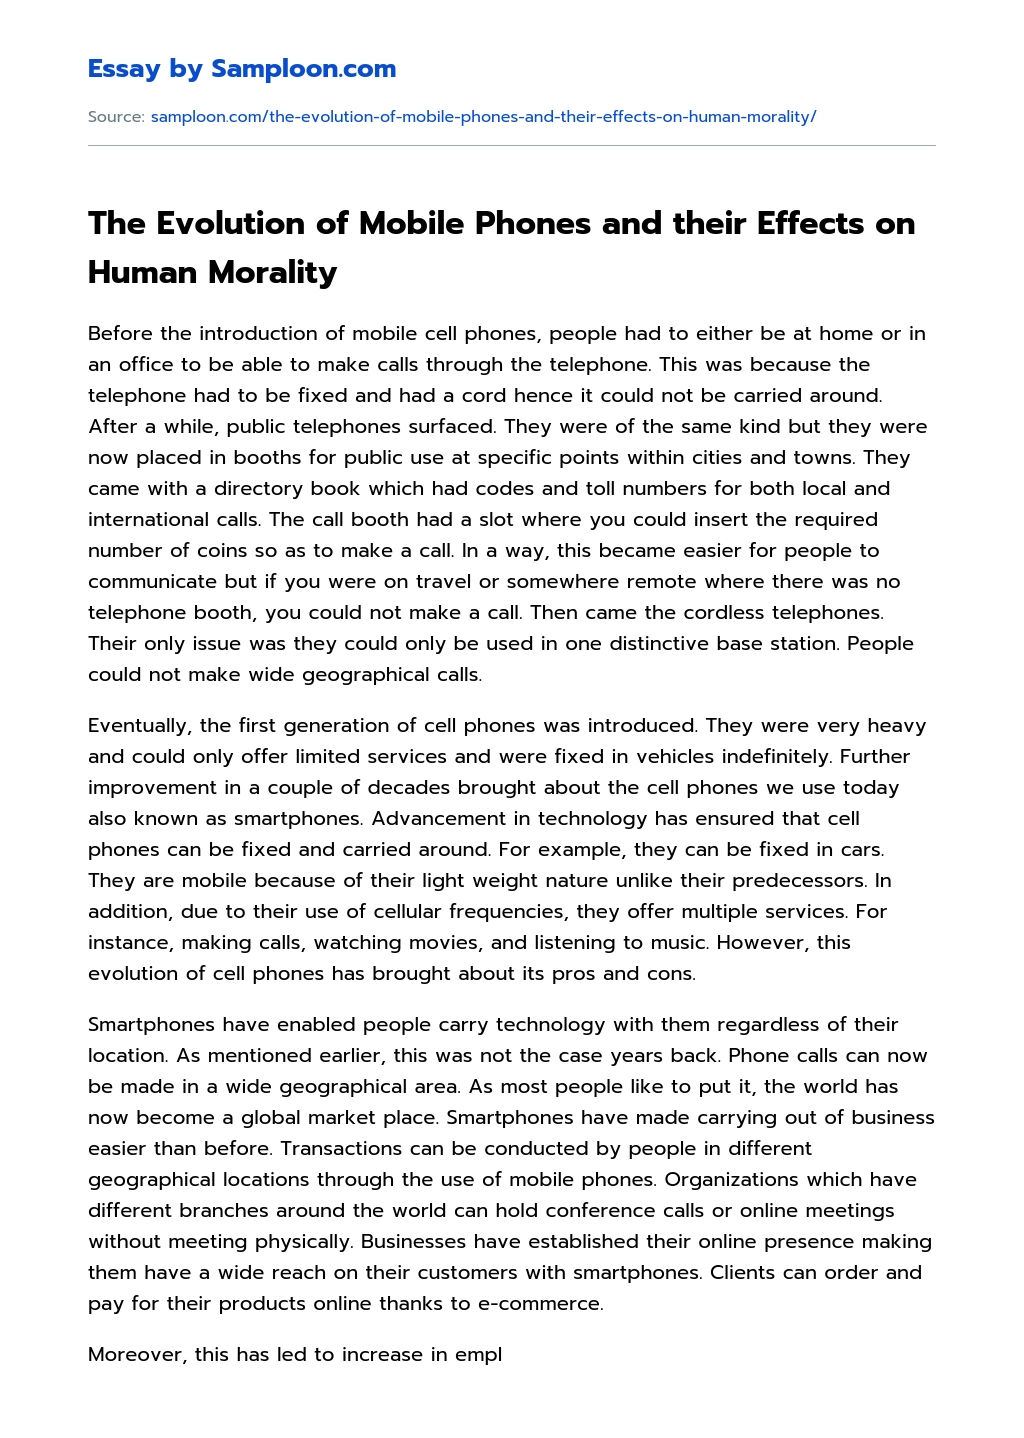 The Evolution of Mobile Phones and their Effects on Human Morality essay